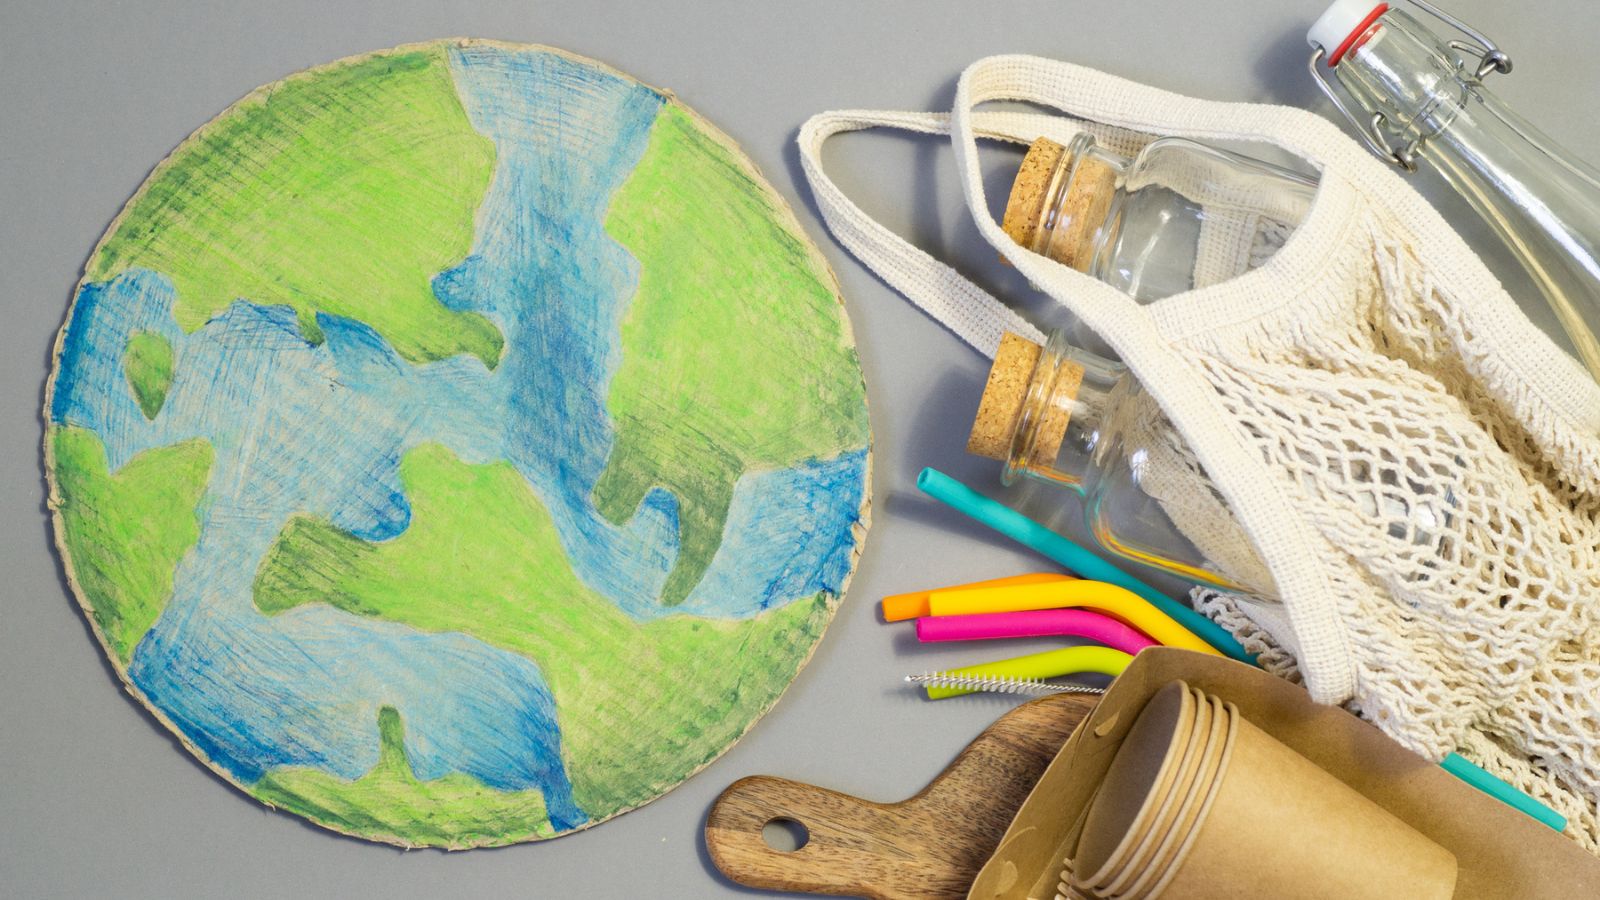 8 Things You Should Recycle But Probably Don’t